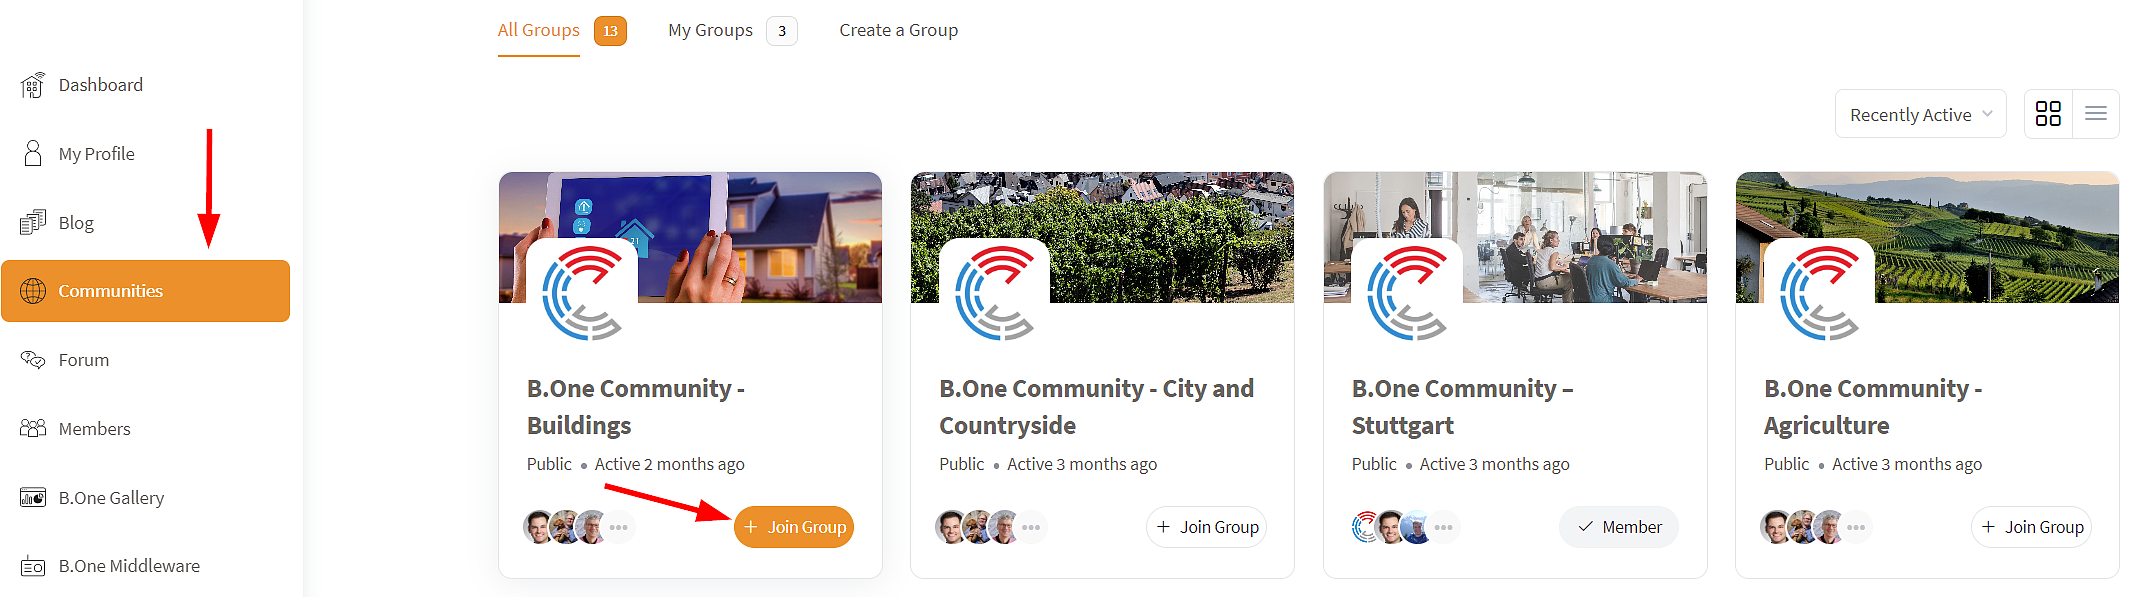 B.One Community: Join Communities as a Member